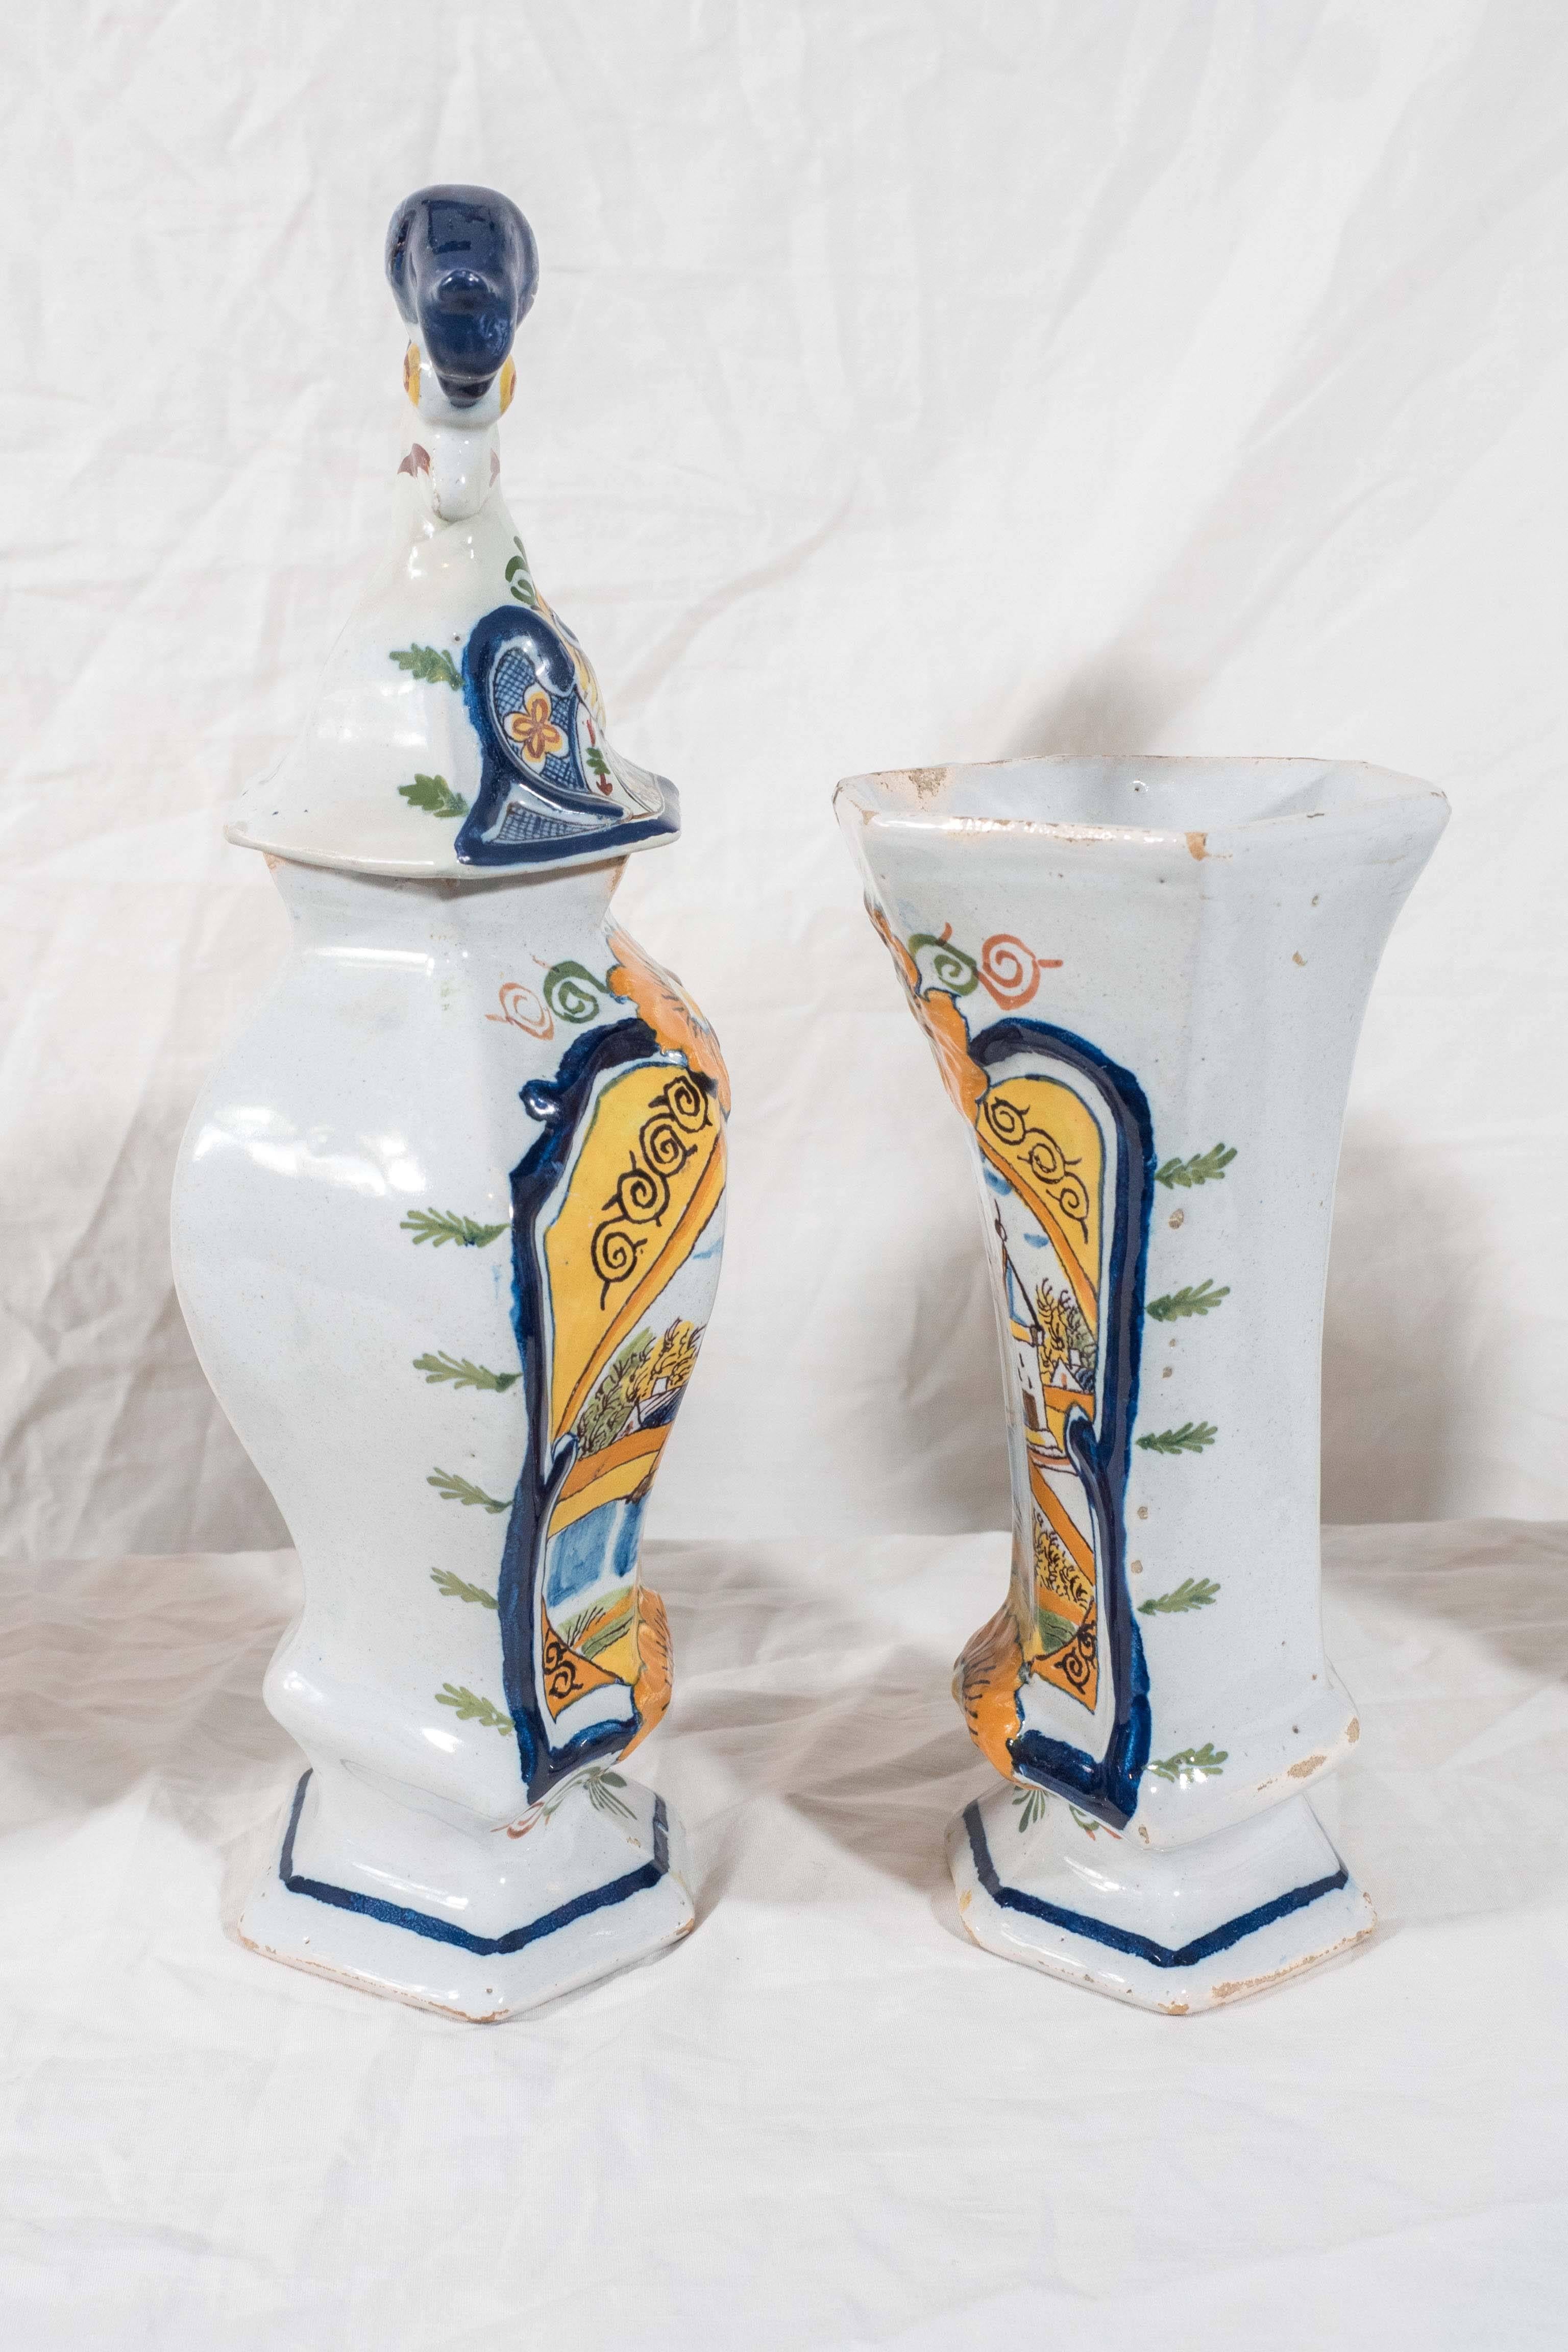  Garniture of Five Delft Vases Painted in Colorful Polychrome IN STOCK 1